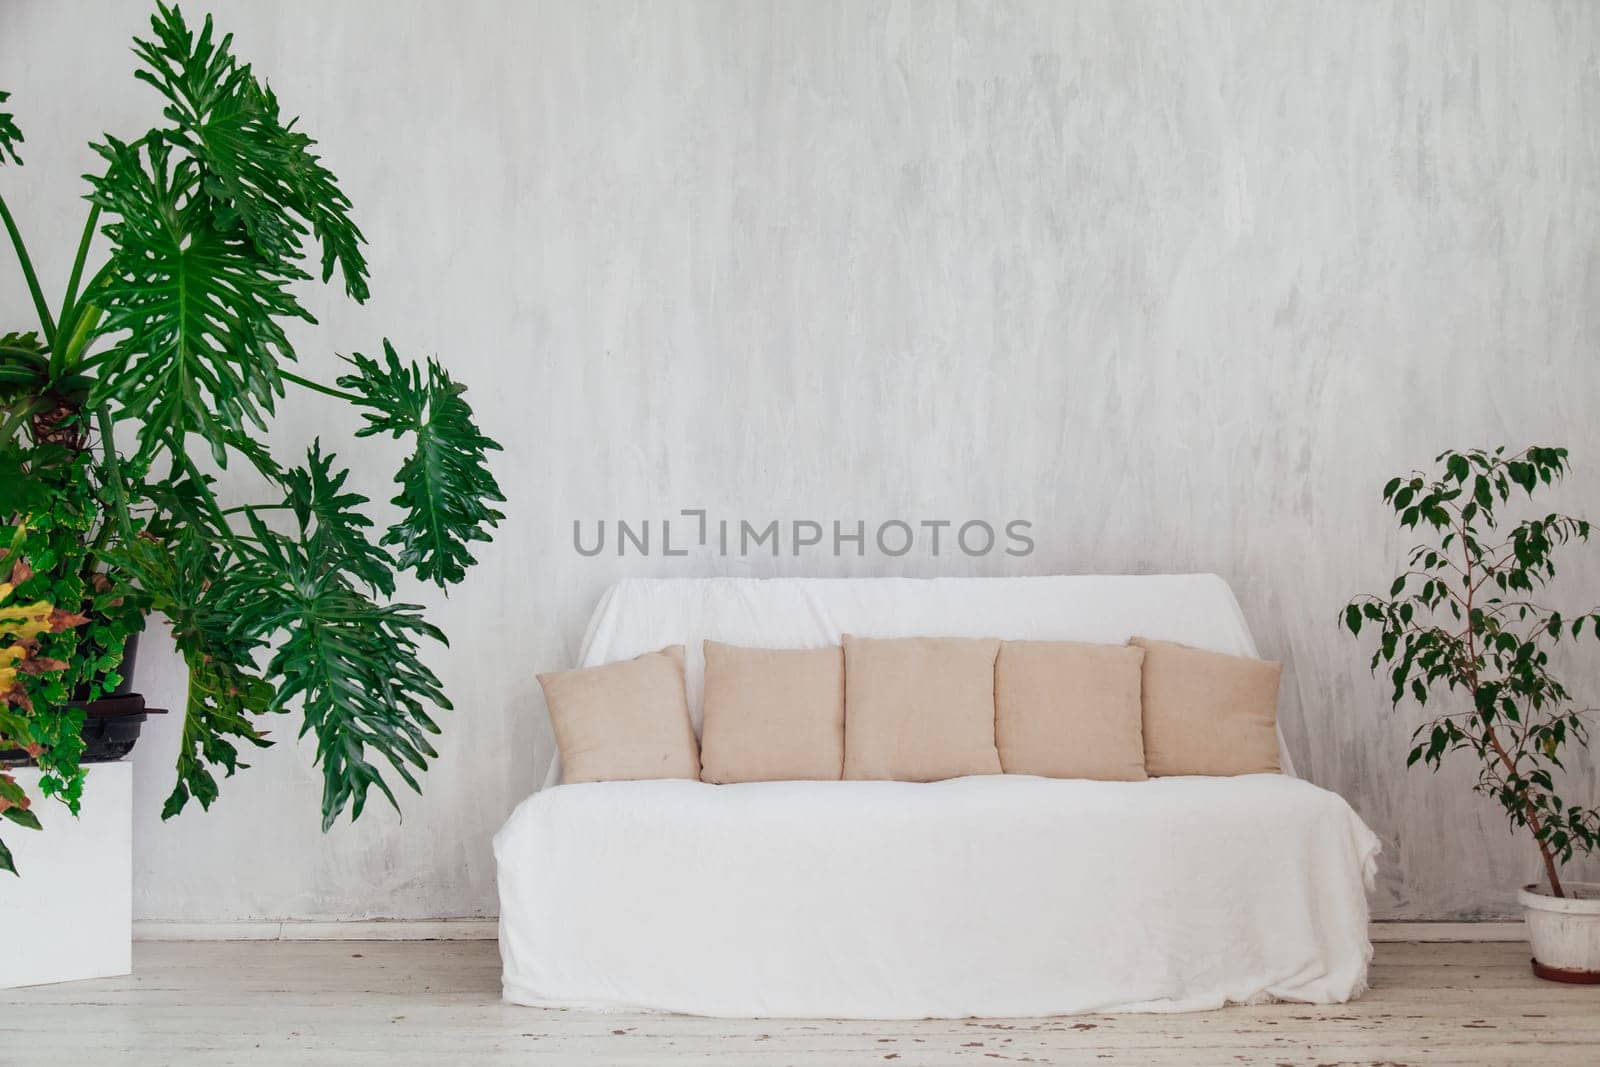 sofa with plants in the interior of an empty room with windows